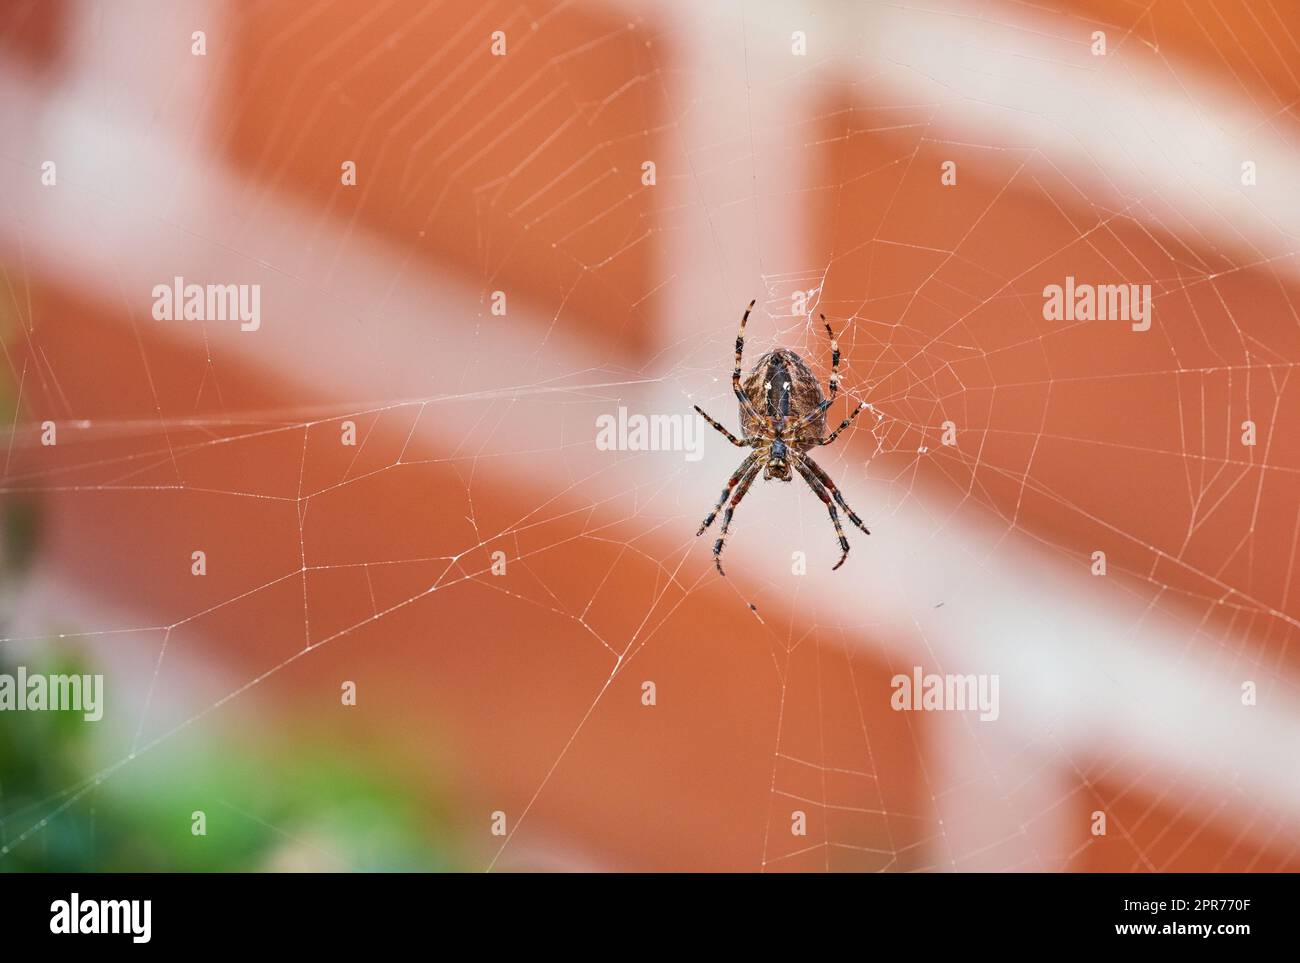 A brown walnut orb weaver spider on its web from below, against blurred background of red brick house. Striped black arachnid in the center of its cobweb. The nuctenea umbratica is beneficial insect Stock Photo